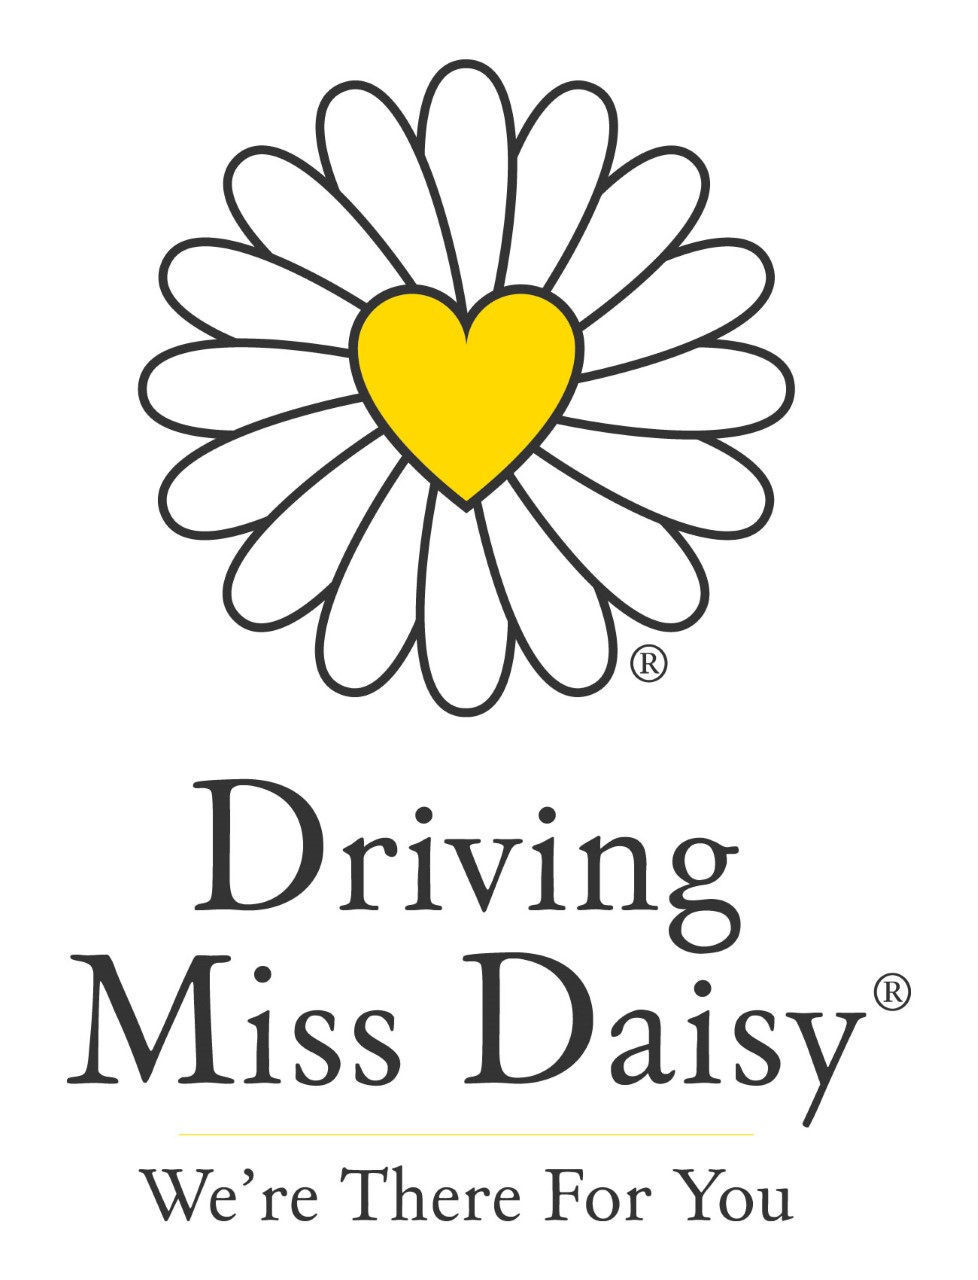 Driving Miss Daisy - we're there for you